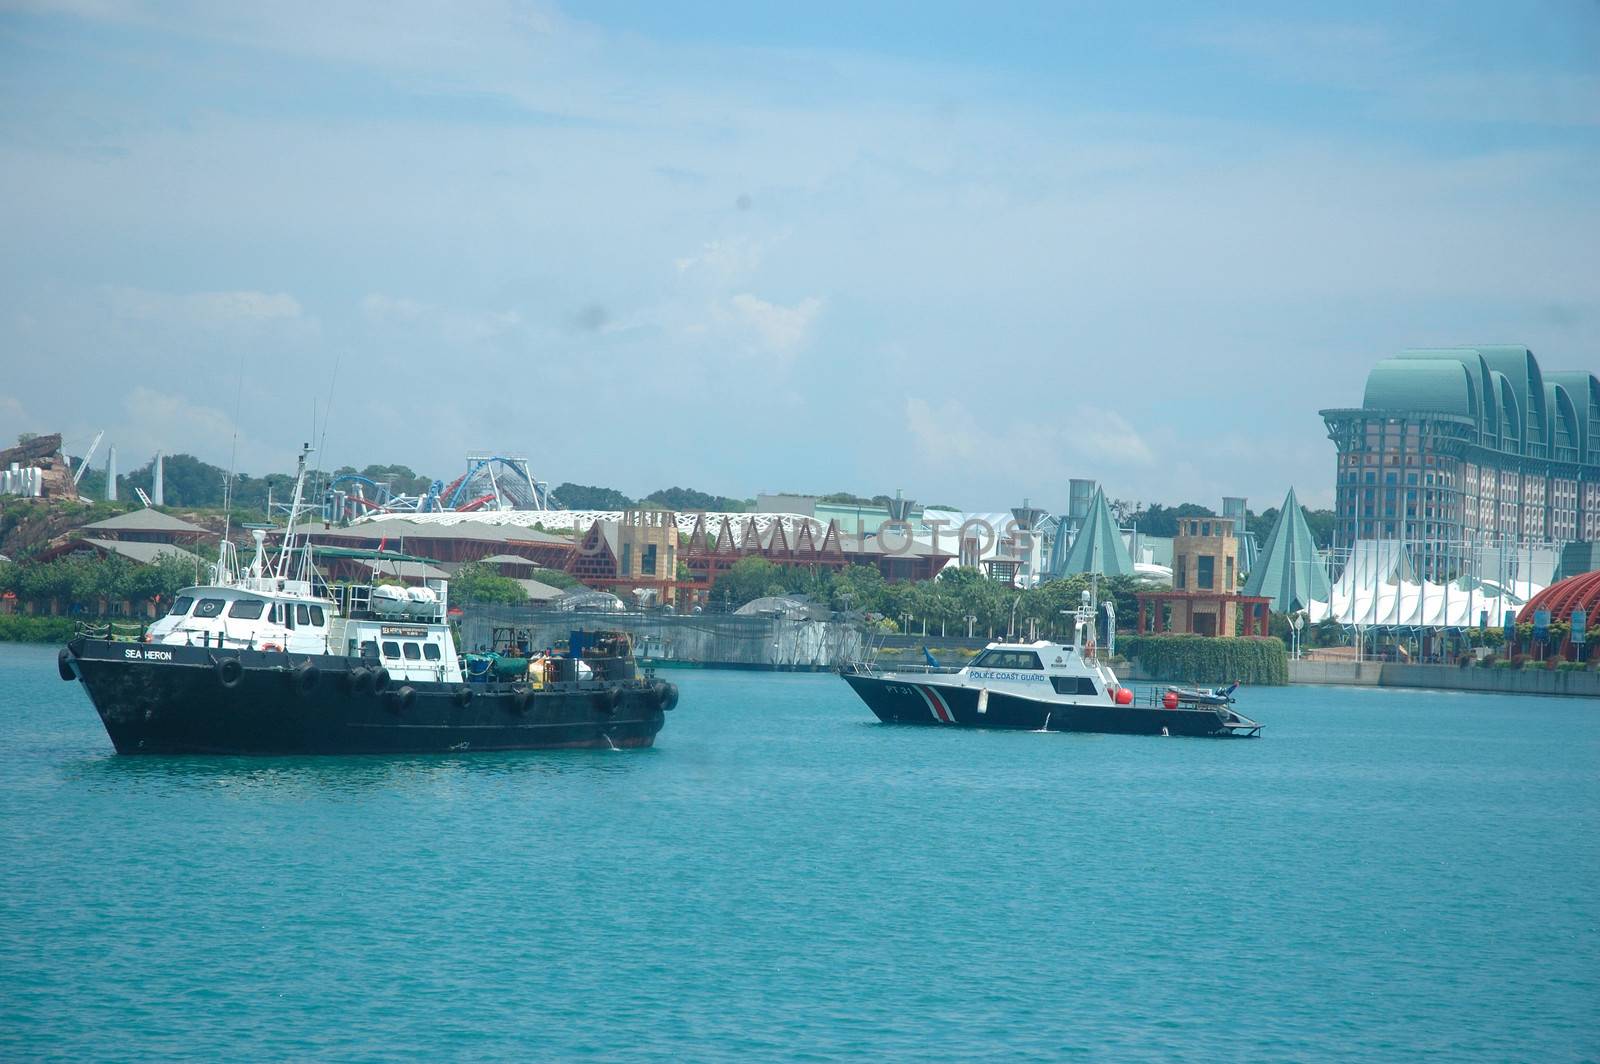 Harbour Front, Singapore - April 13, 2013: Scenery of cruise and boat harbour at Harbour Front, Singapore.